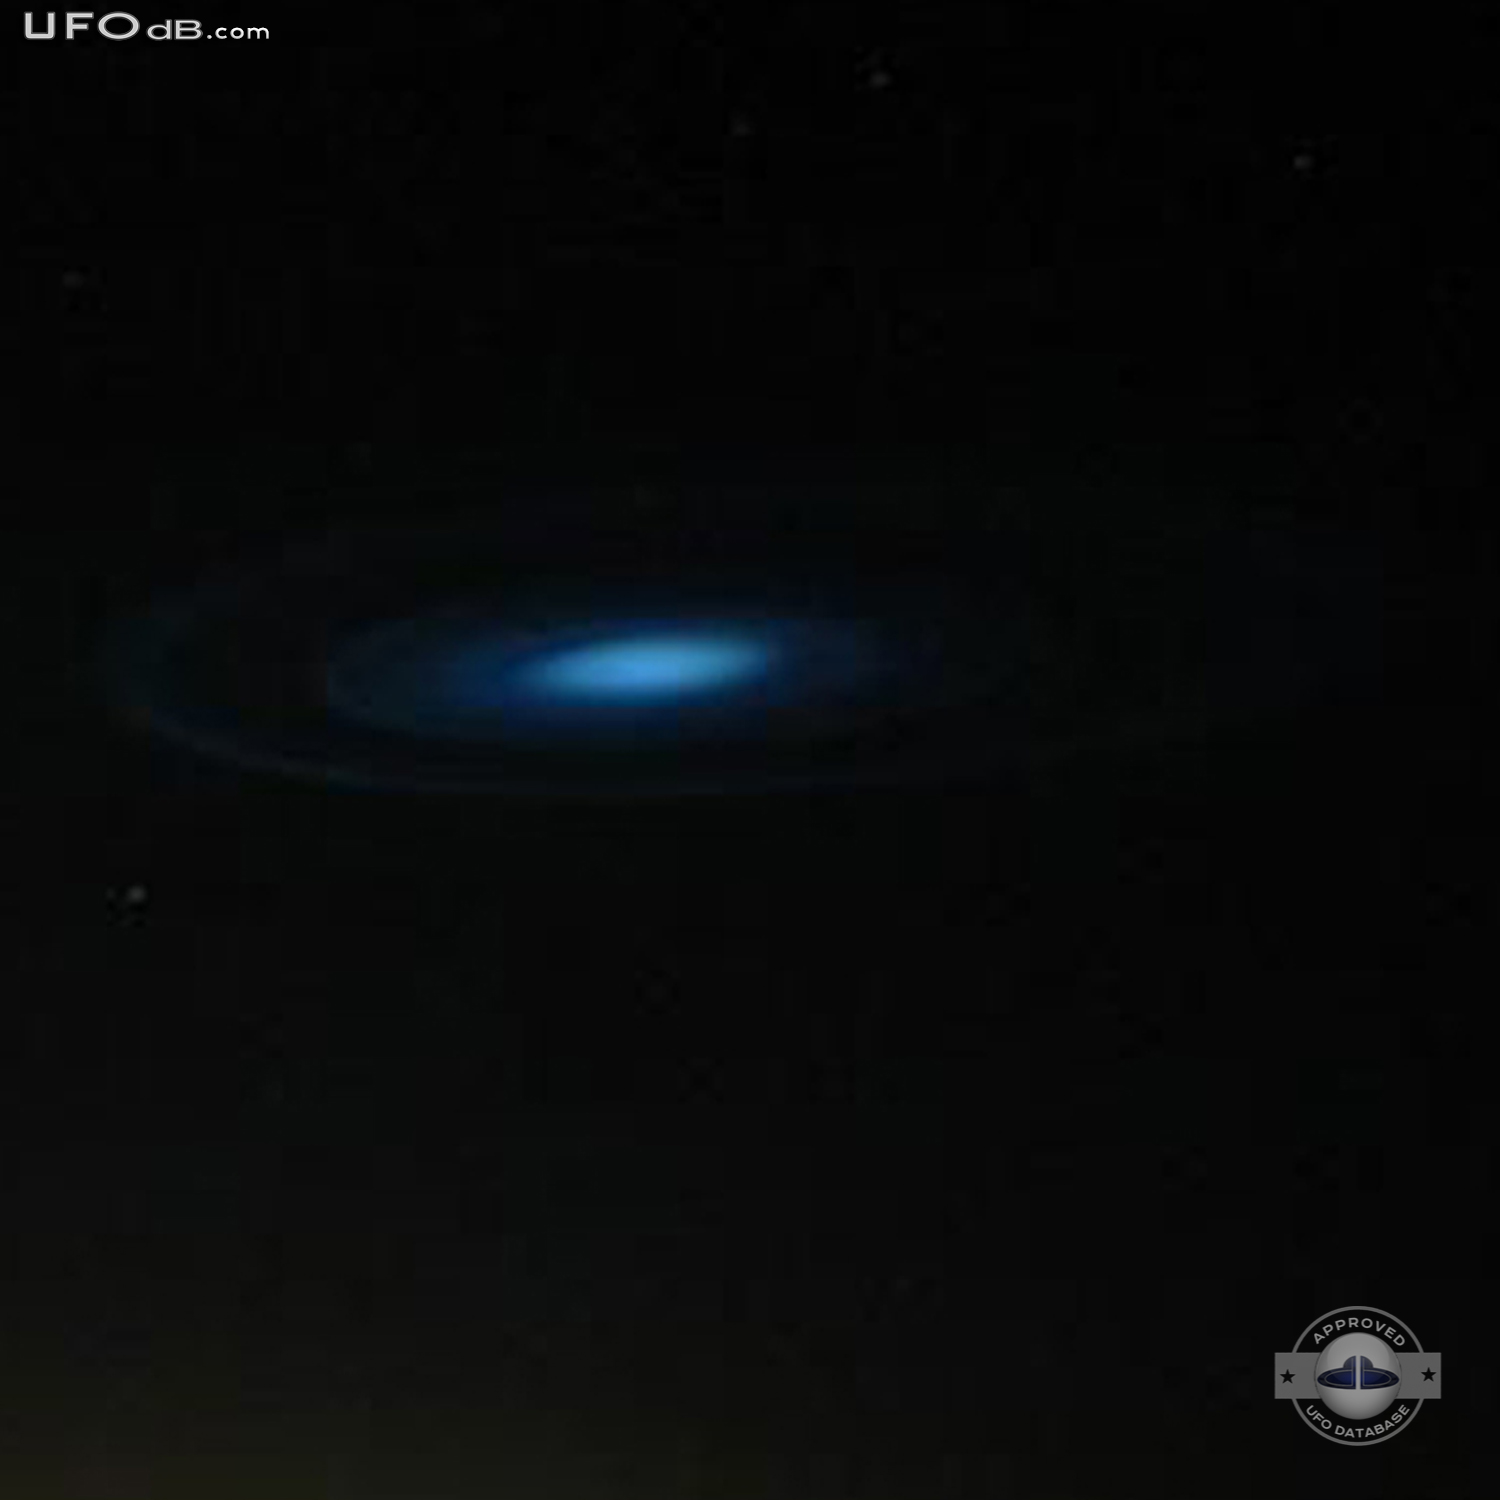 Christchurch New Zealand | Blue Glowing UFO on Picture | March 29 2011 UFO Picture #302-4